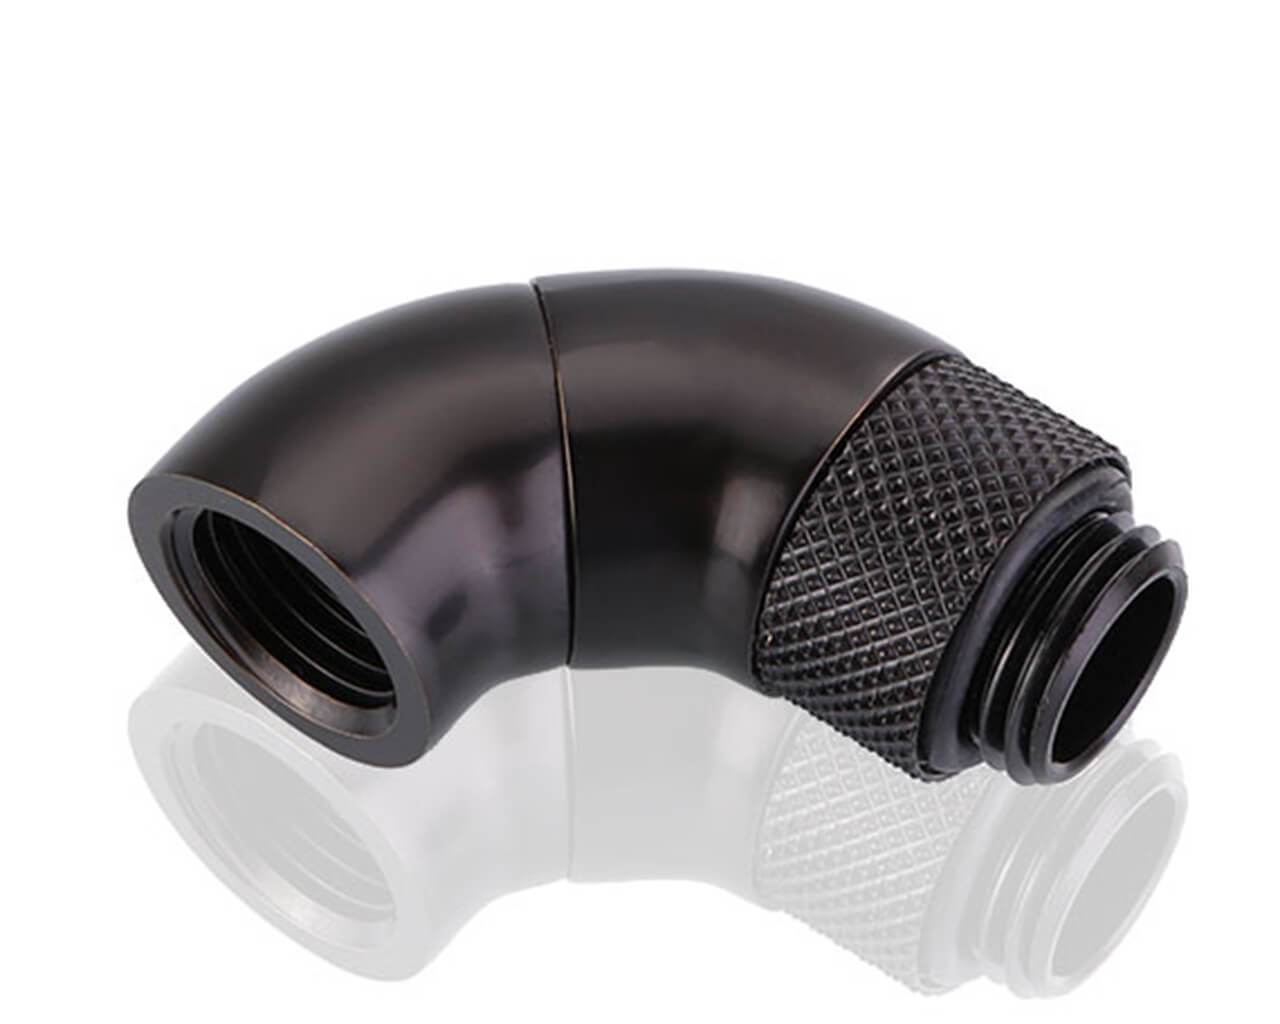 Bykski G 1/4in. Male to Female 90 Degree Double Rotary Elbow Fitting (B-RD90-SK) - PrimoChill - KEEPING IT COOL Black